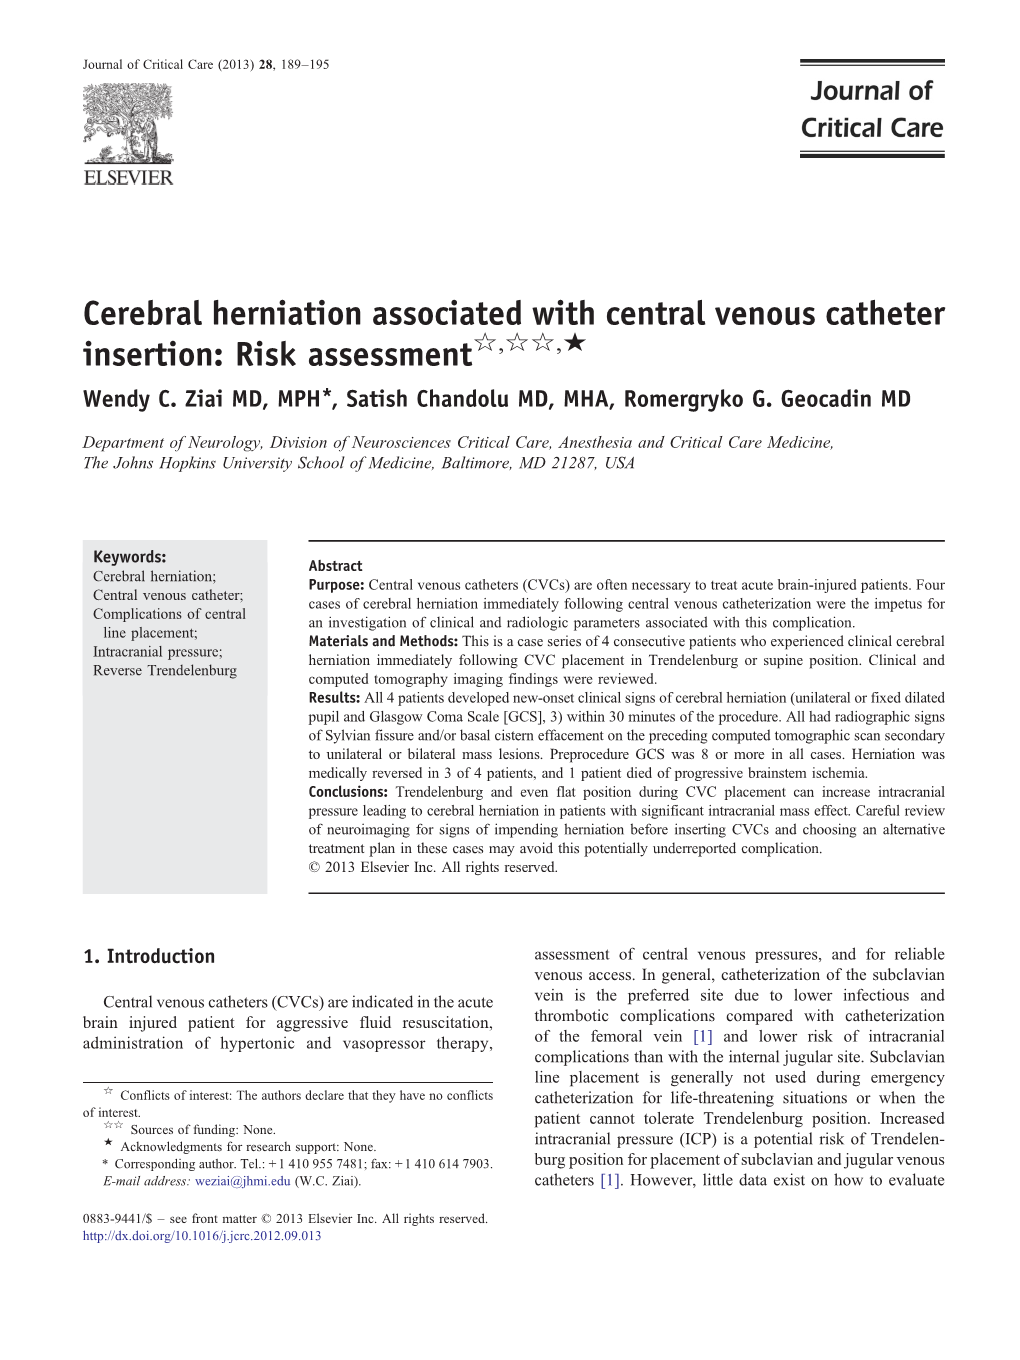 Cerebral Herniation Associated with Central Venous Catheter Insertion: Risk Assessment☆,☆☆,★ Wendy C